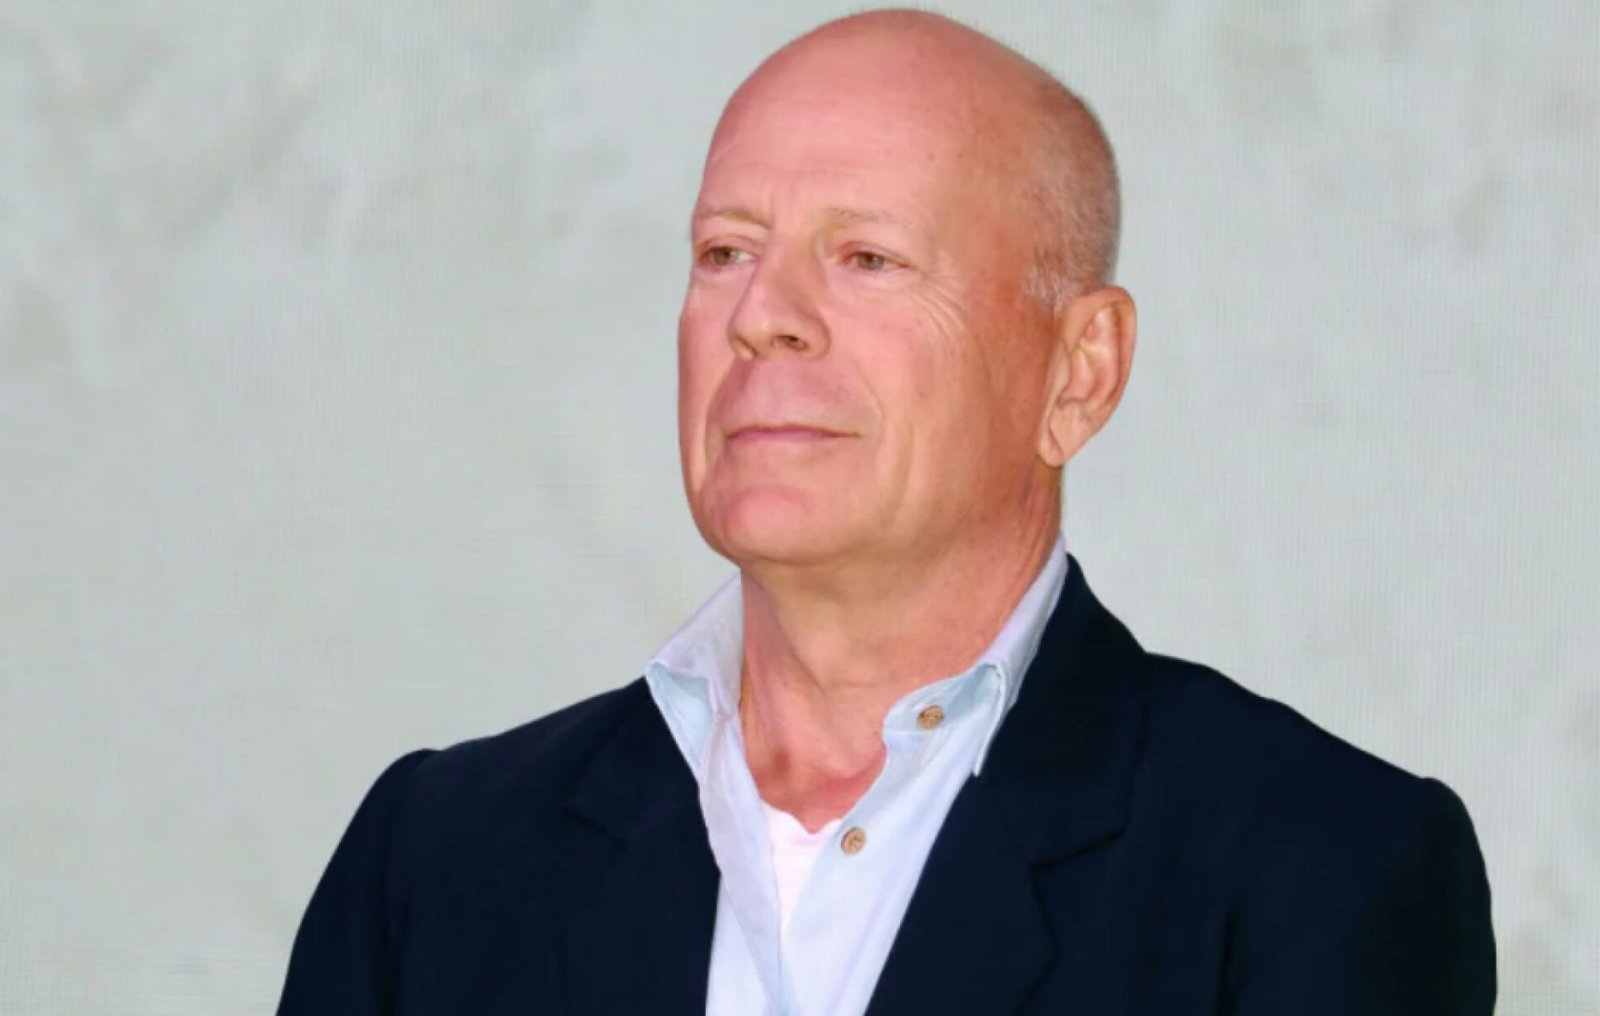 Hollywood: Bruce Willis says goodbye to acting career